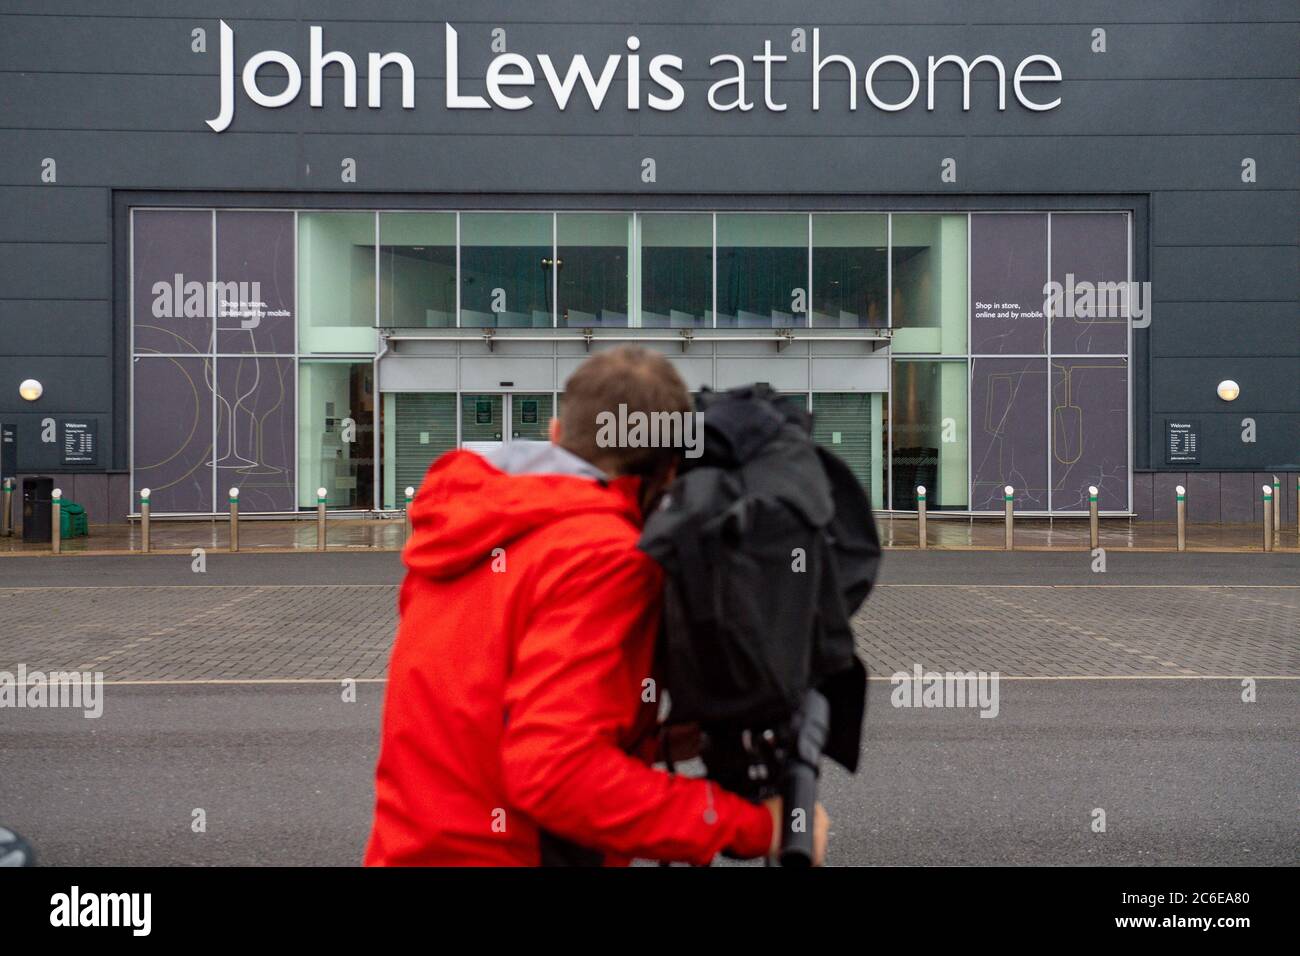 A member of the media films outside the John Lewis At Home store in Tamworth, which is due to close as John Lewis said it will shut two full-size department stores in Birmingham and Watford, four At Home shops in Croydon, Newbury, Swindon and Tamworth, as well as two travel hub outlets at Heathrow and St Pancras. Stock Photo